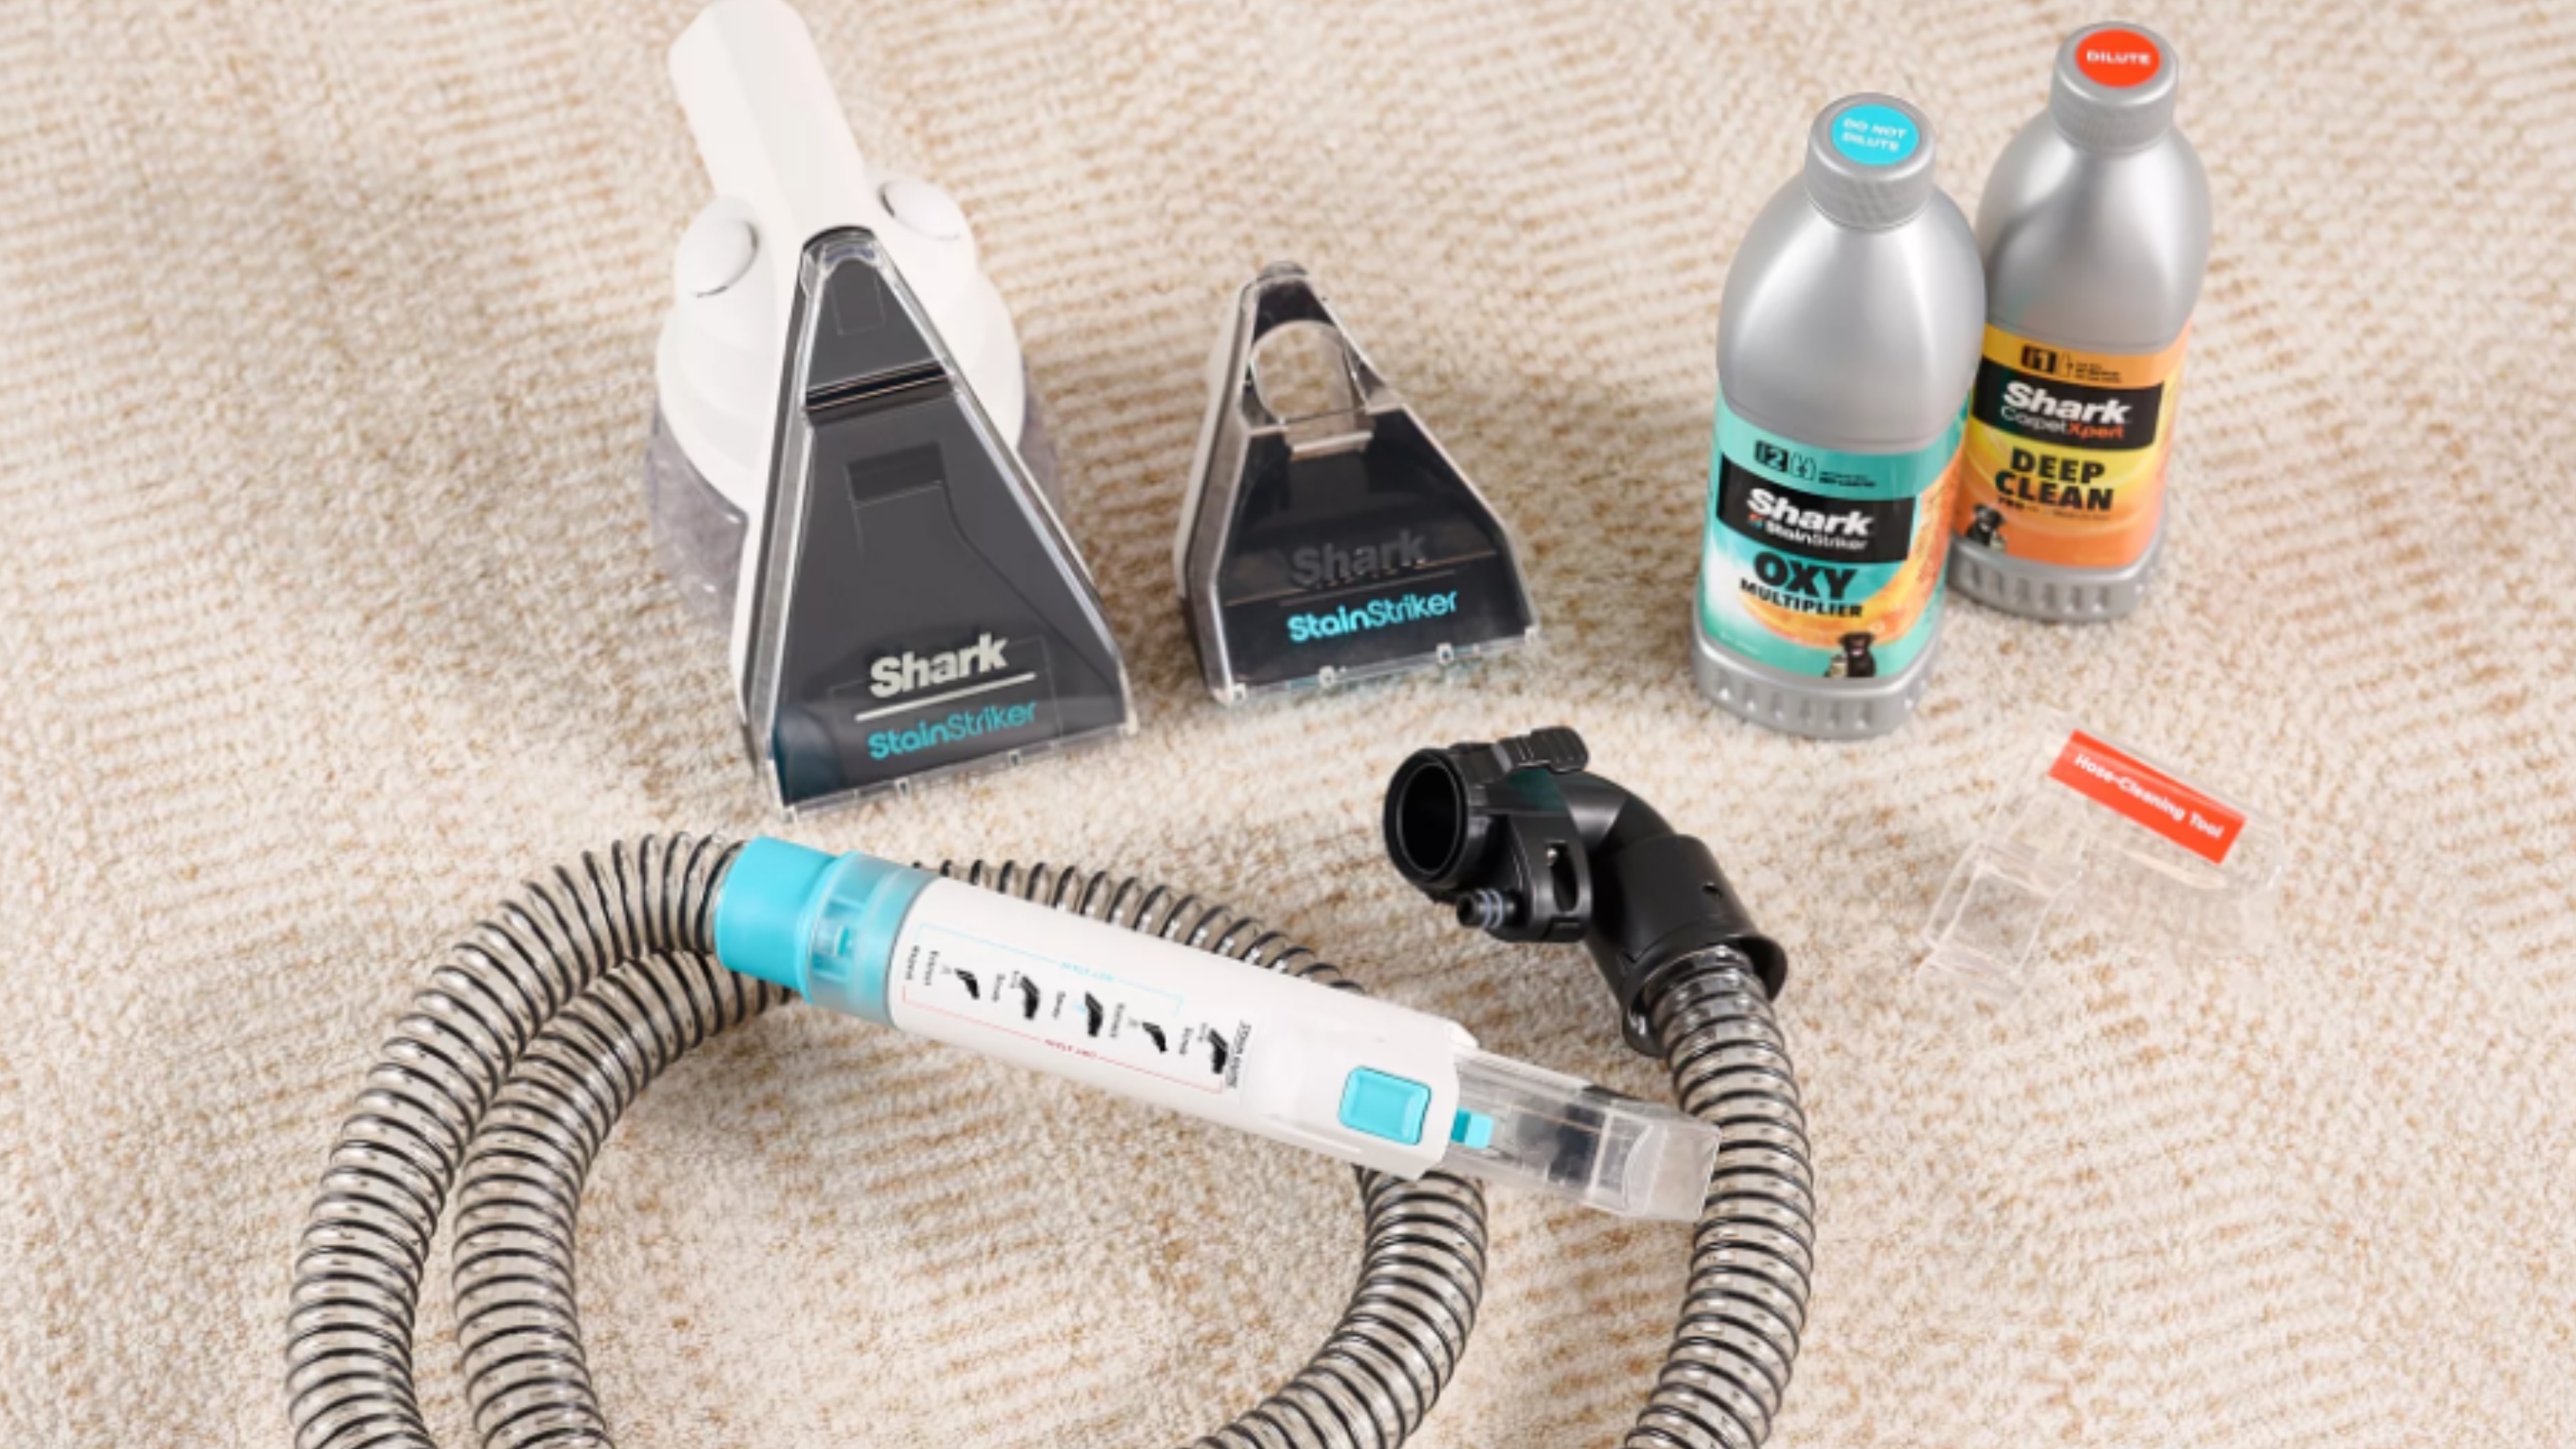 Review: This Shark Carpet Cleaner Made My Dirty Rug Look Brand New